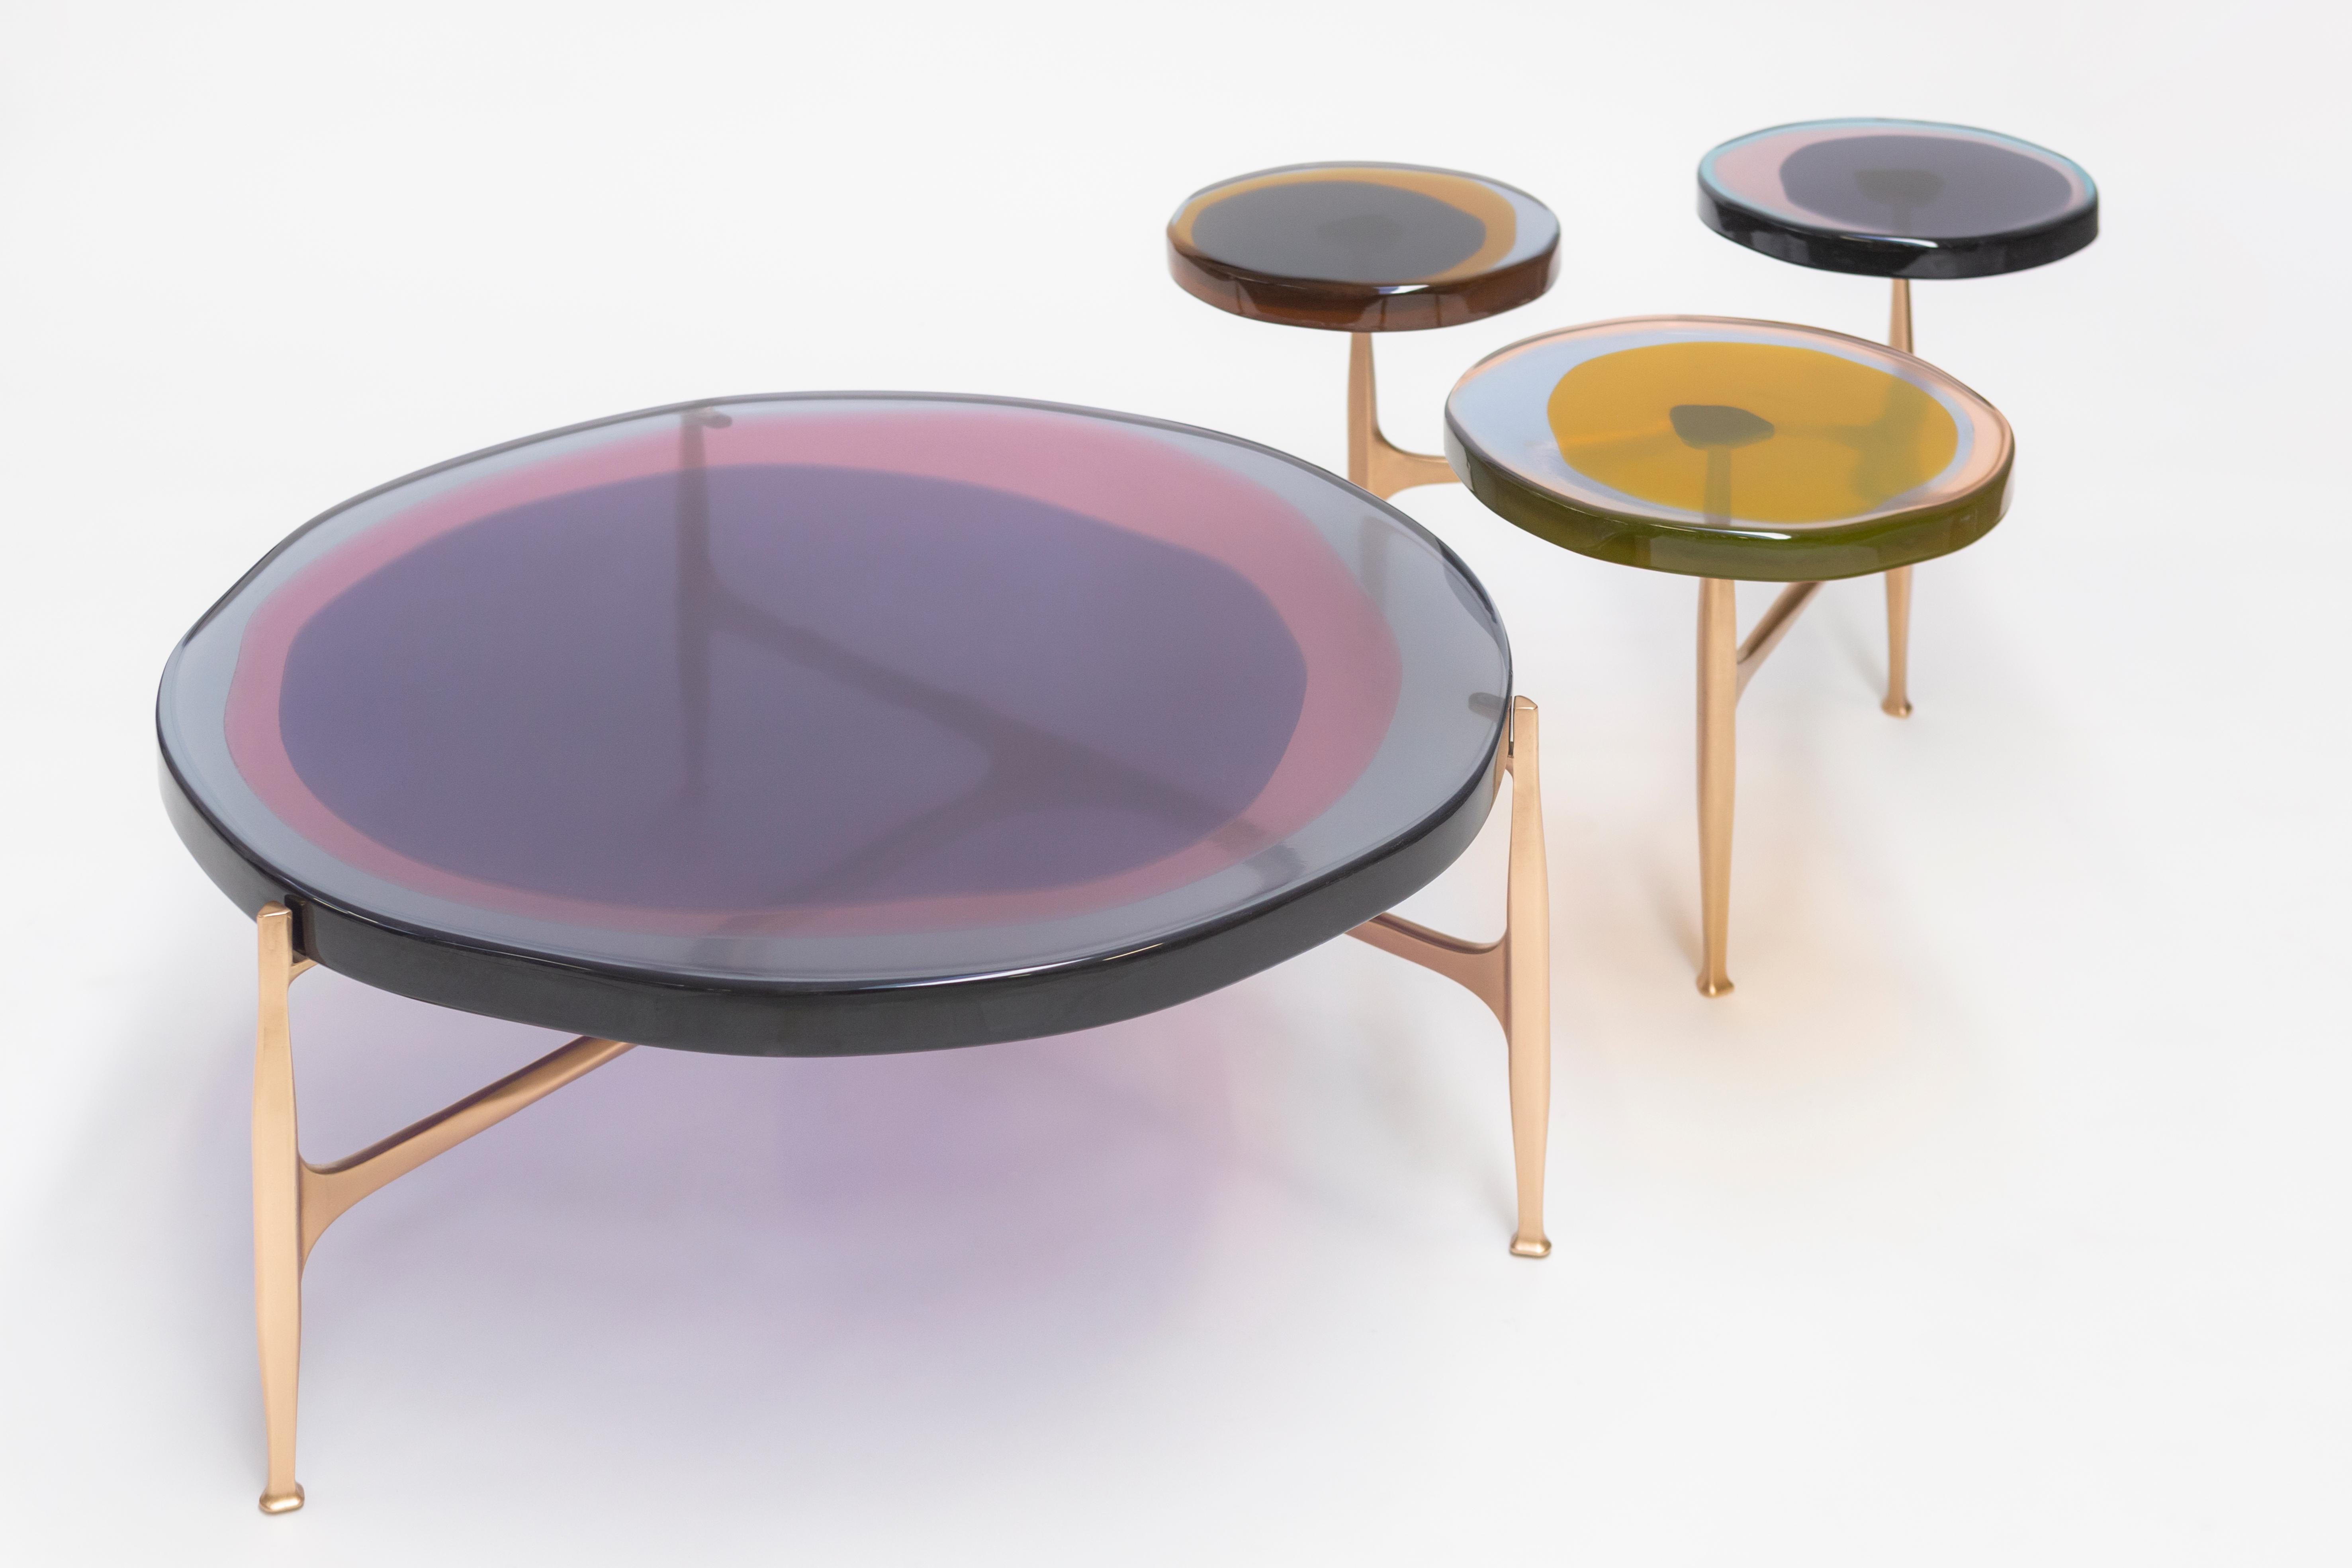 Agatha Coffe Table 3 by Draga & Aurel Resin and Bronze, 21st Century For Sale 2